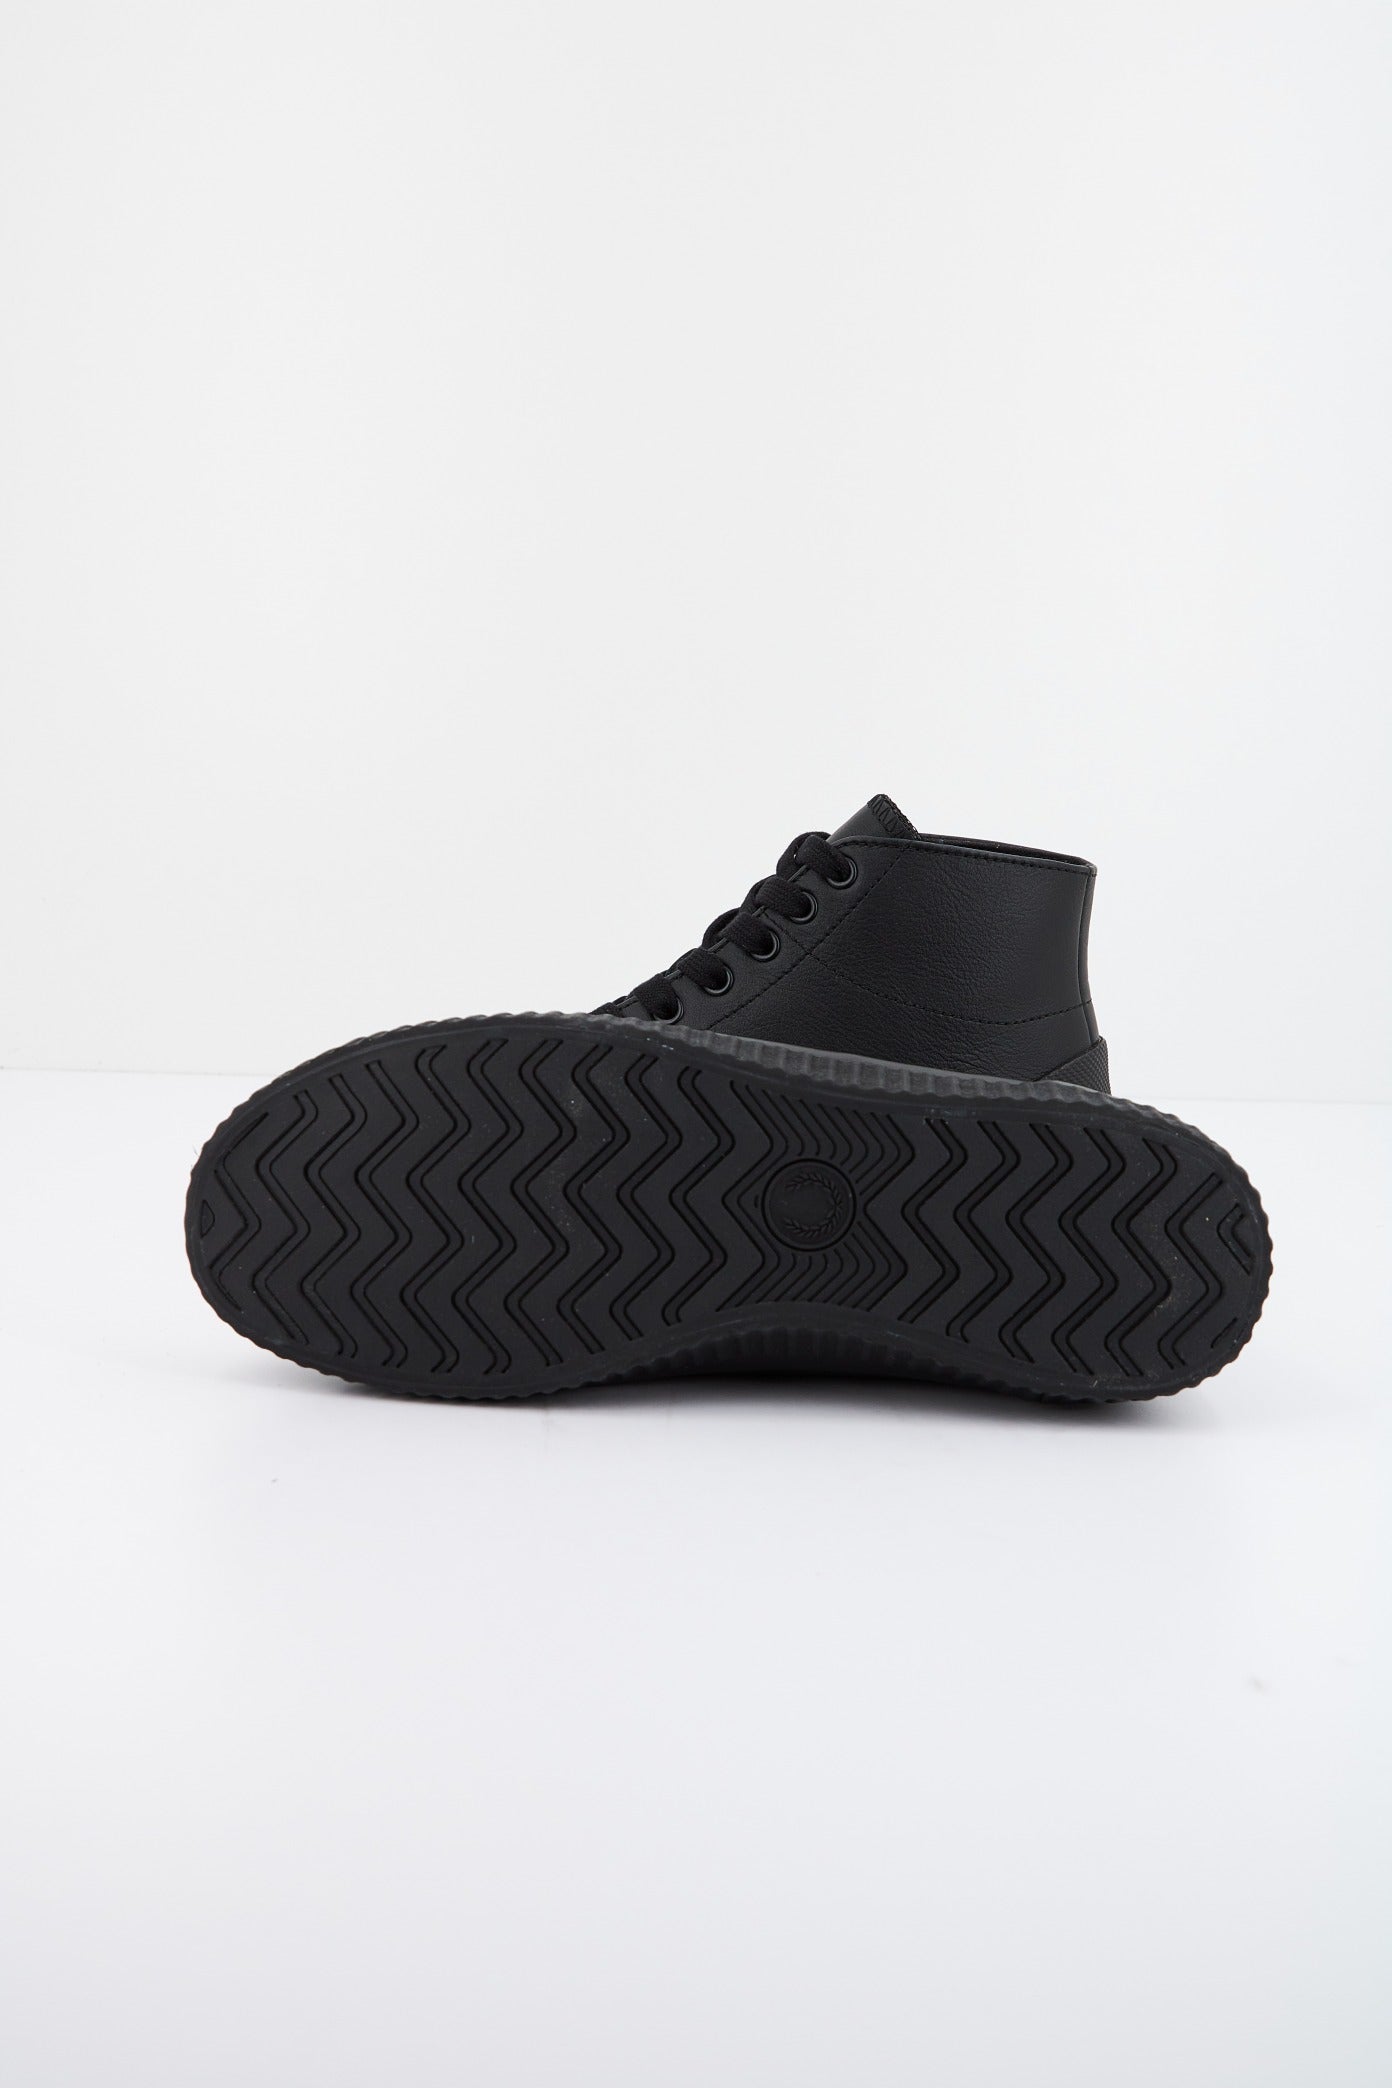 FRED PERRY HUGHES MID LEATHER en color NEGRO  (4)